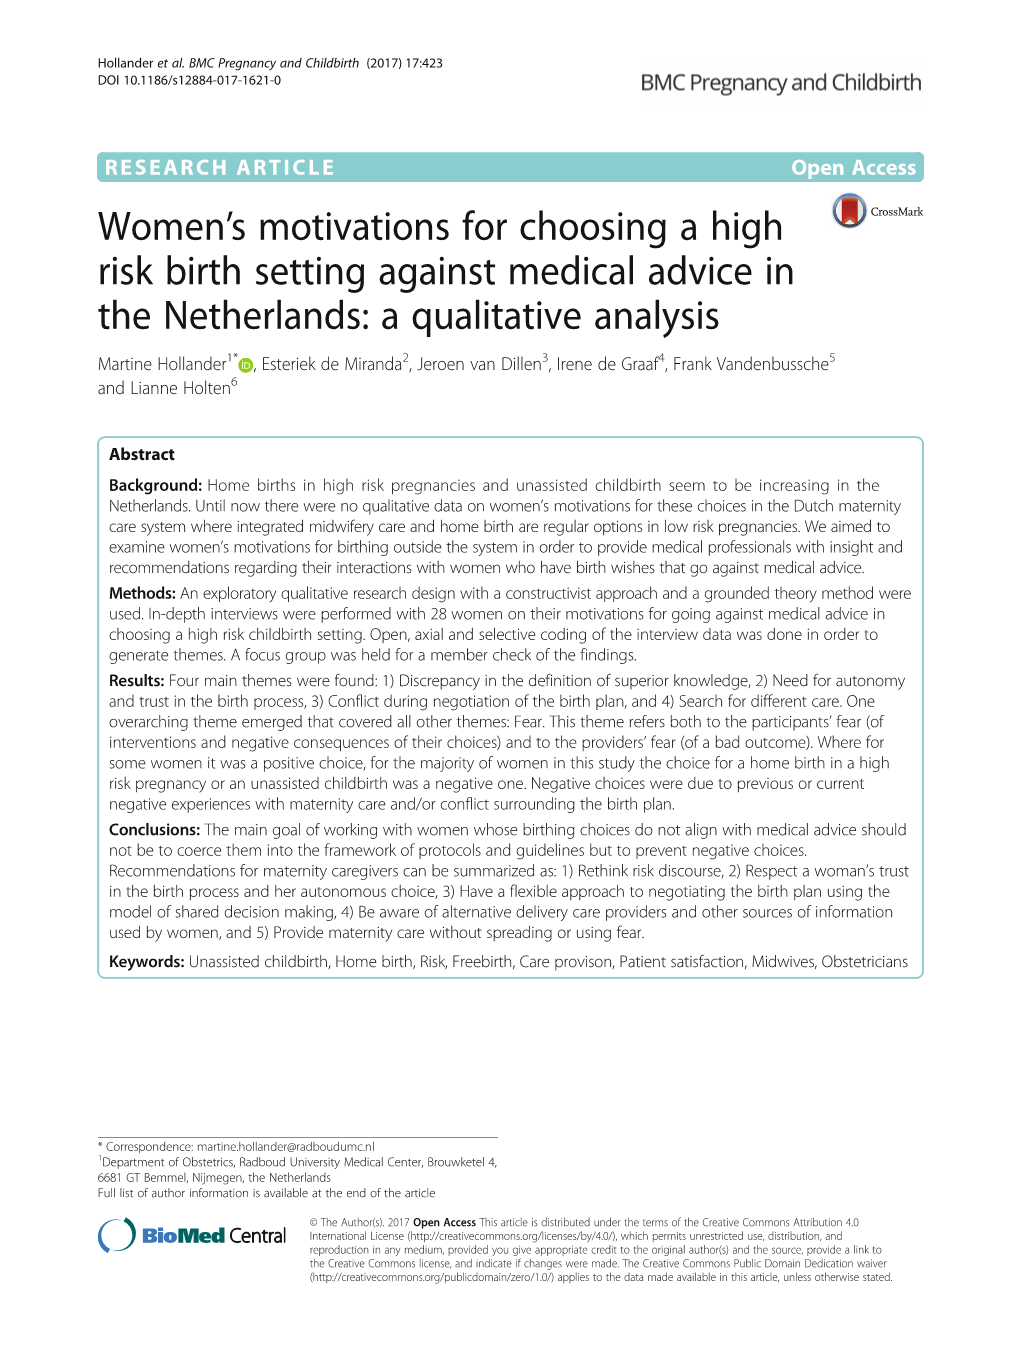 Women's Motivations for Choosing a High Risk Birth Setting Against